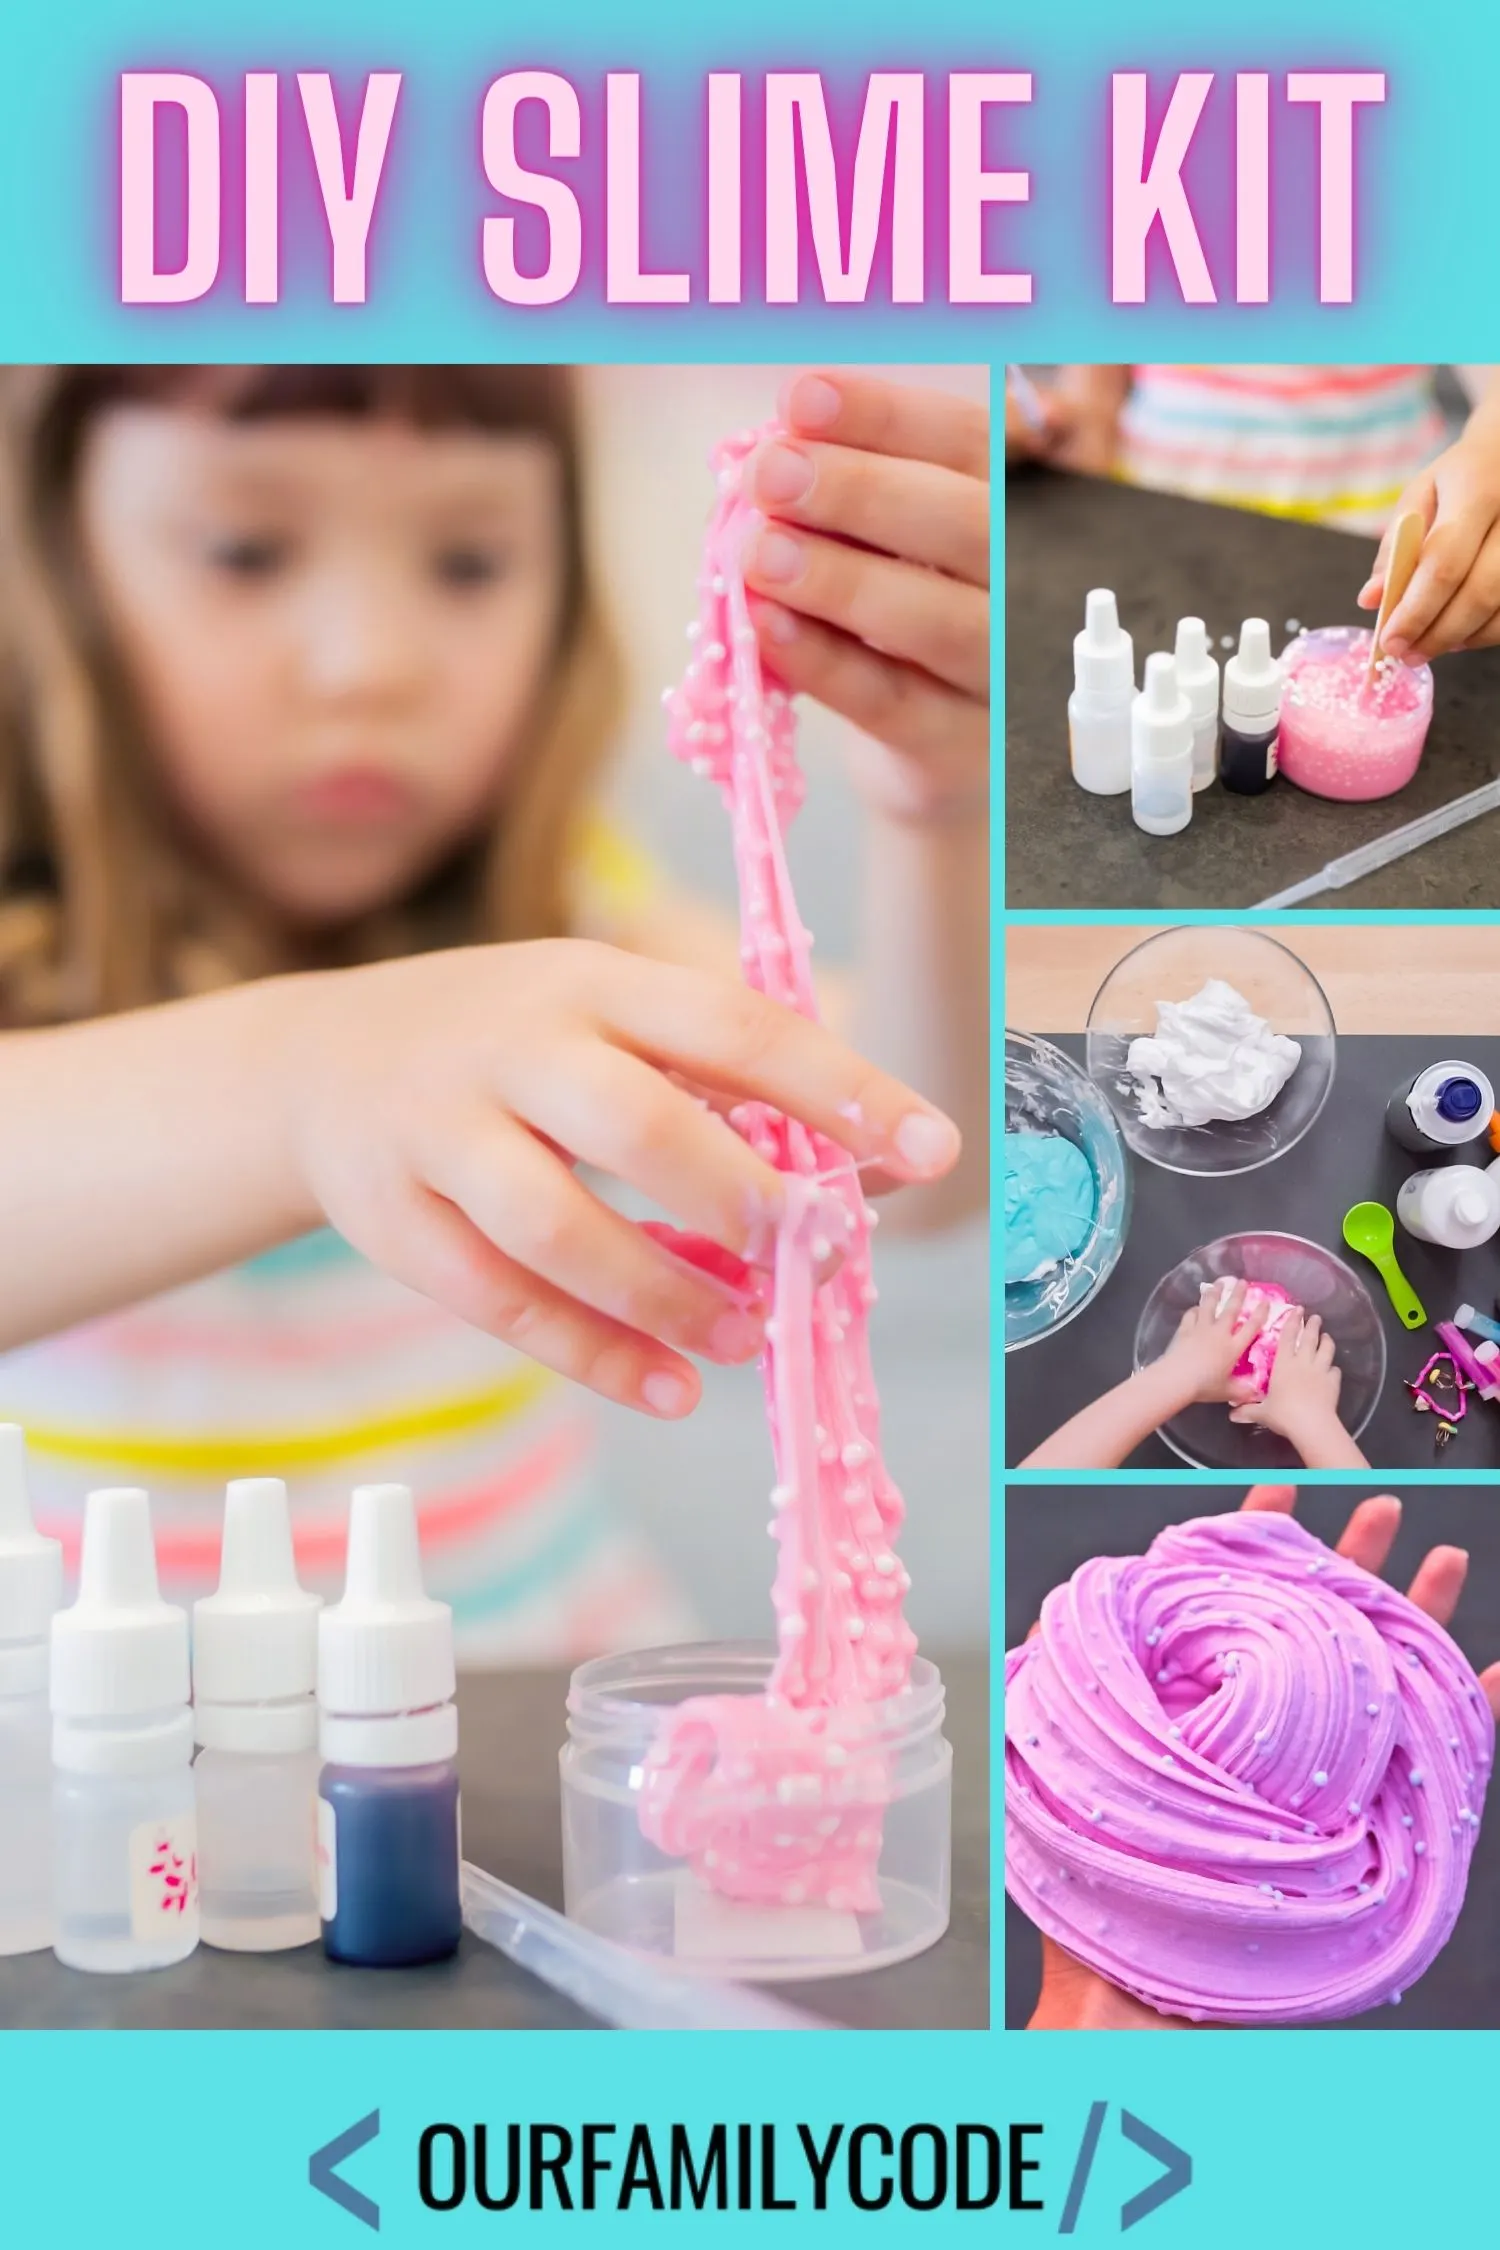 A picture of a kid making slime with the text "DIY slime kit" in pink font.